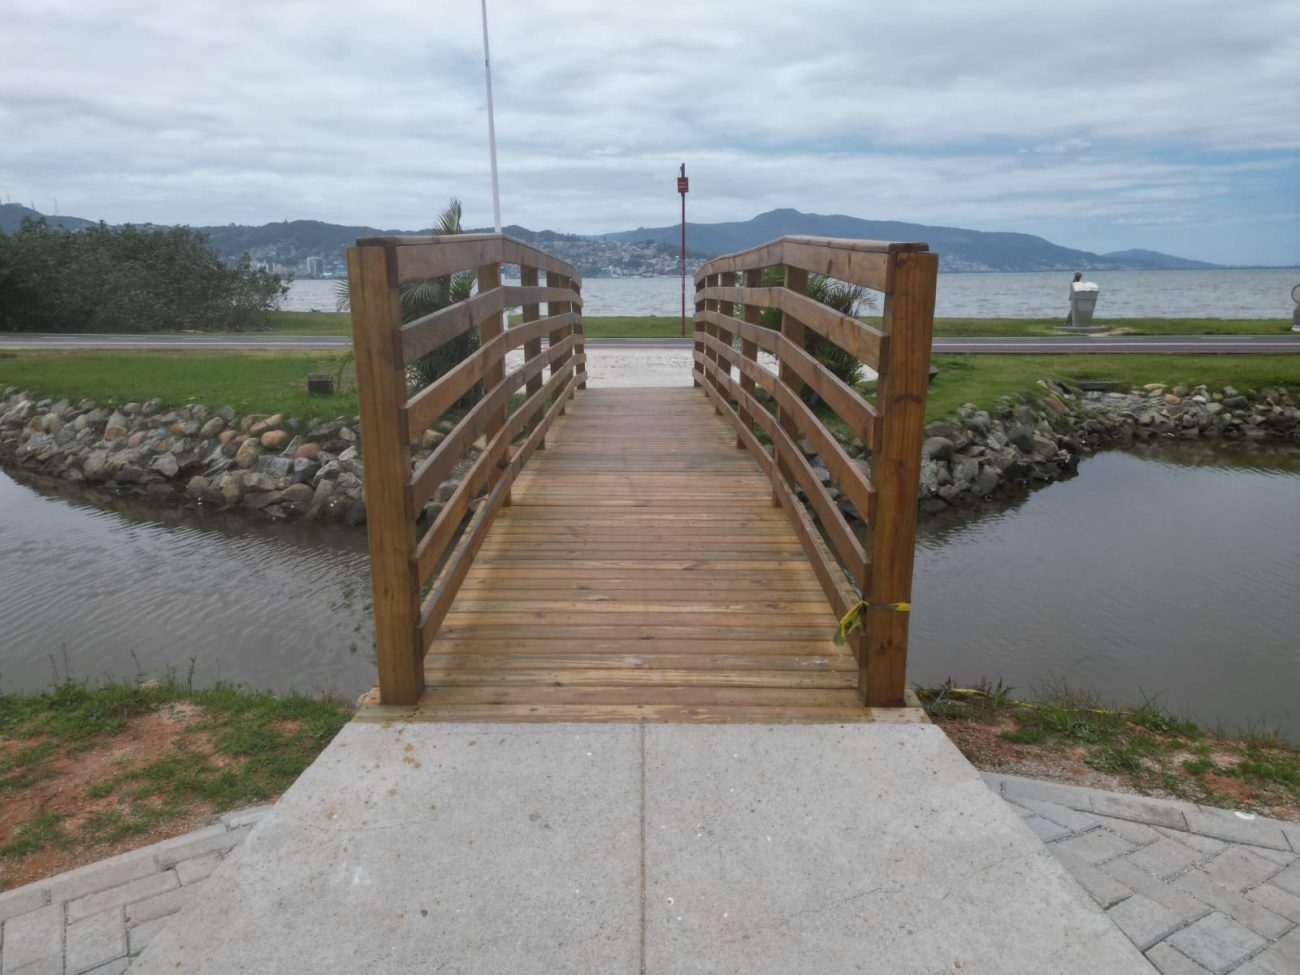 Coqueiros Park reopens after renovation - Leo Russo/PMF